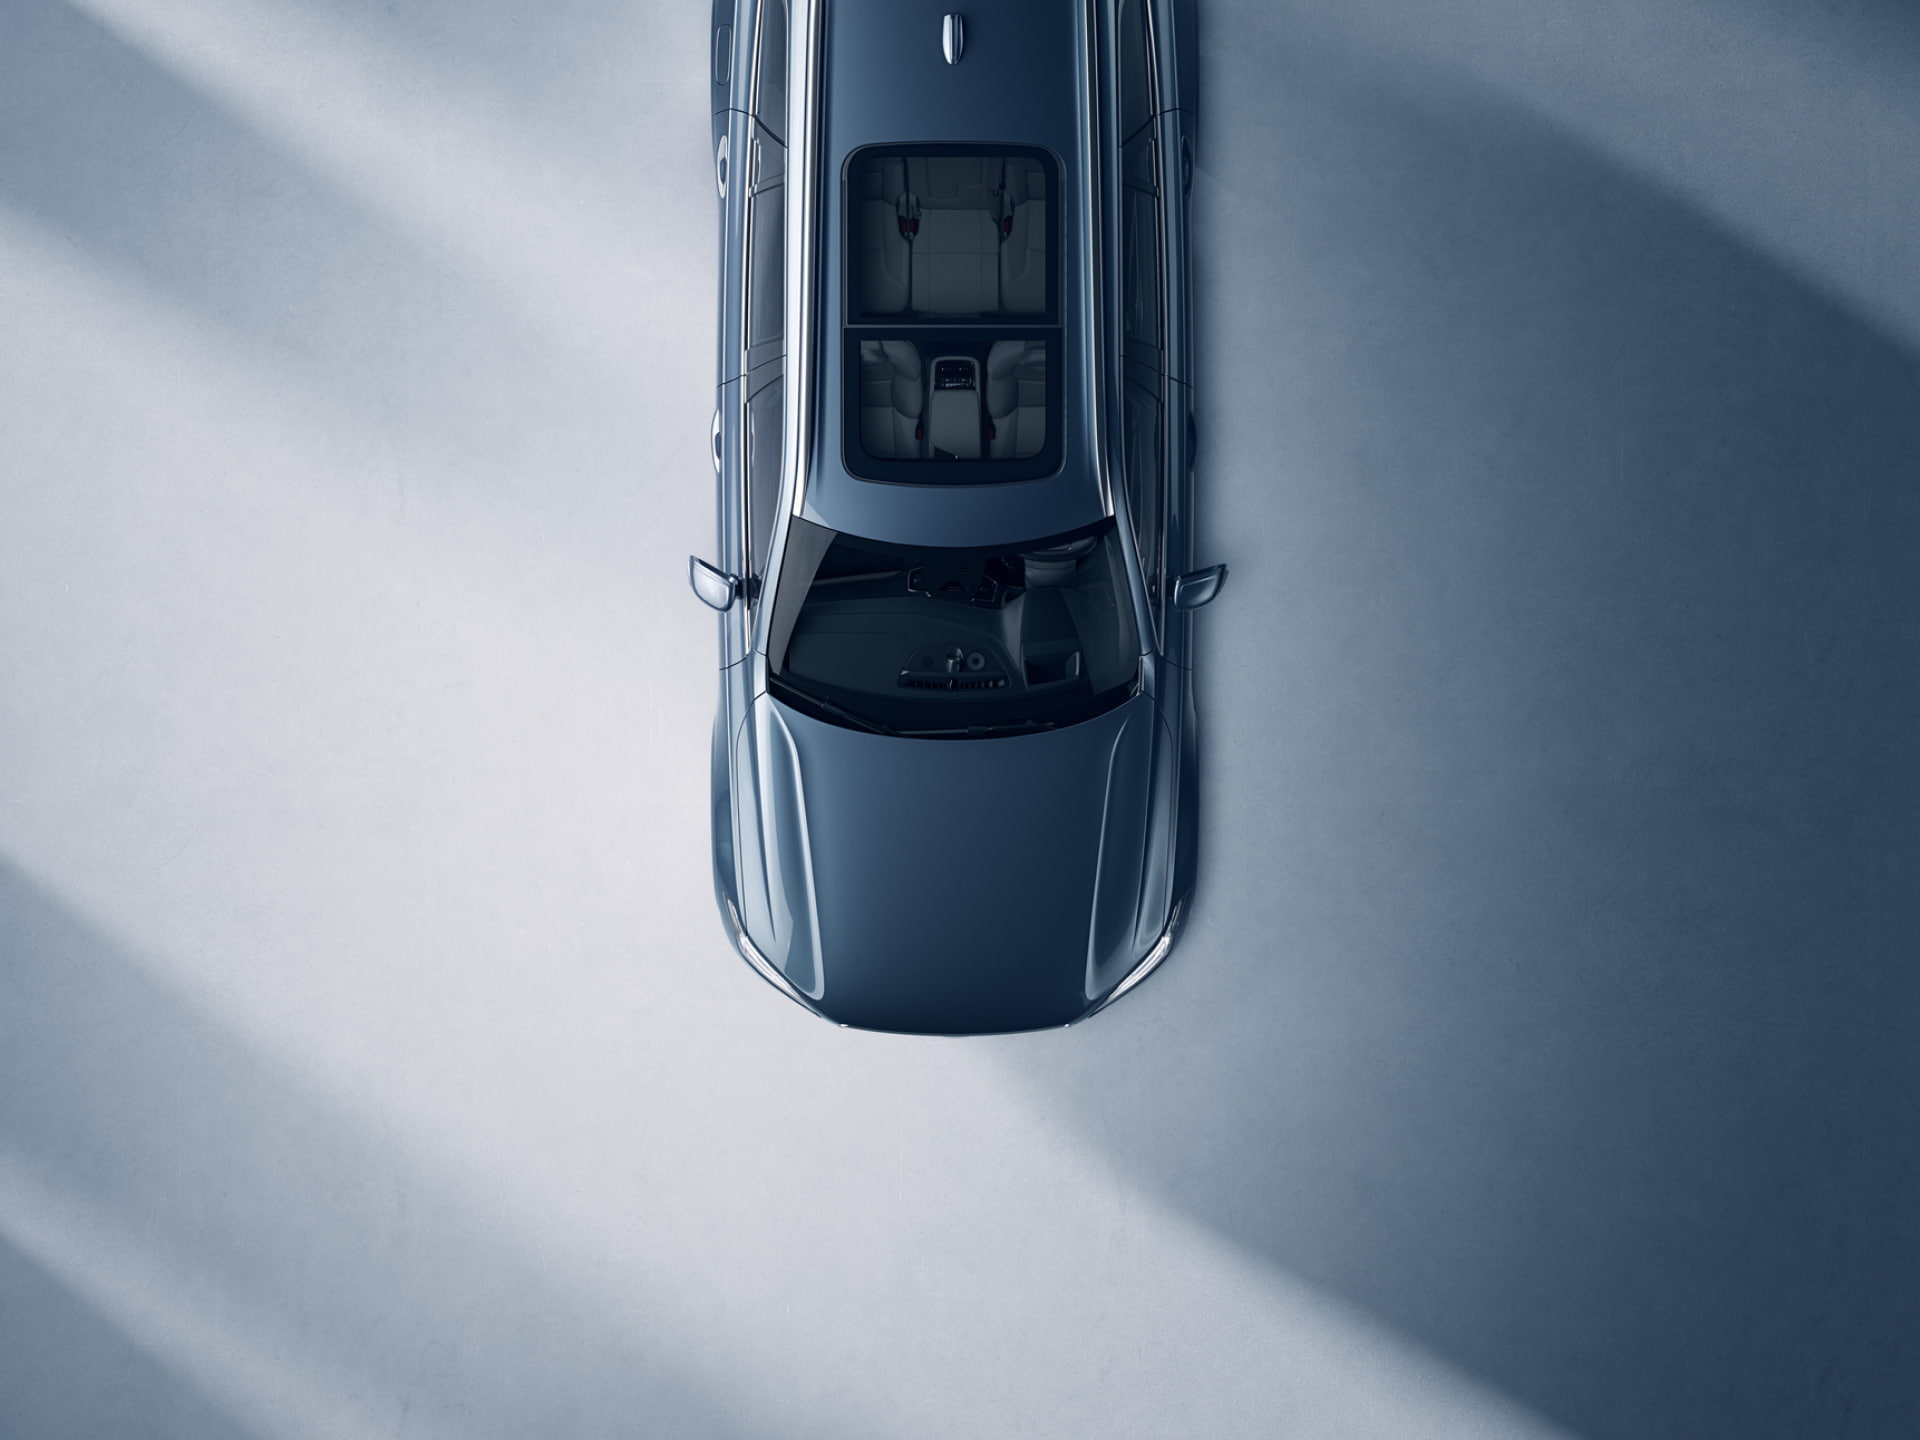 A bird's eye view image showing the panoramic sunroof of a Volvo XC90.